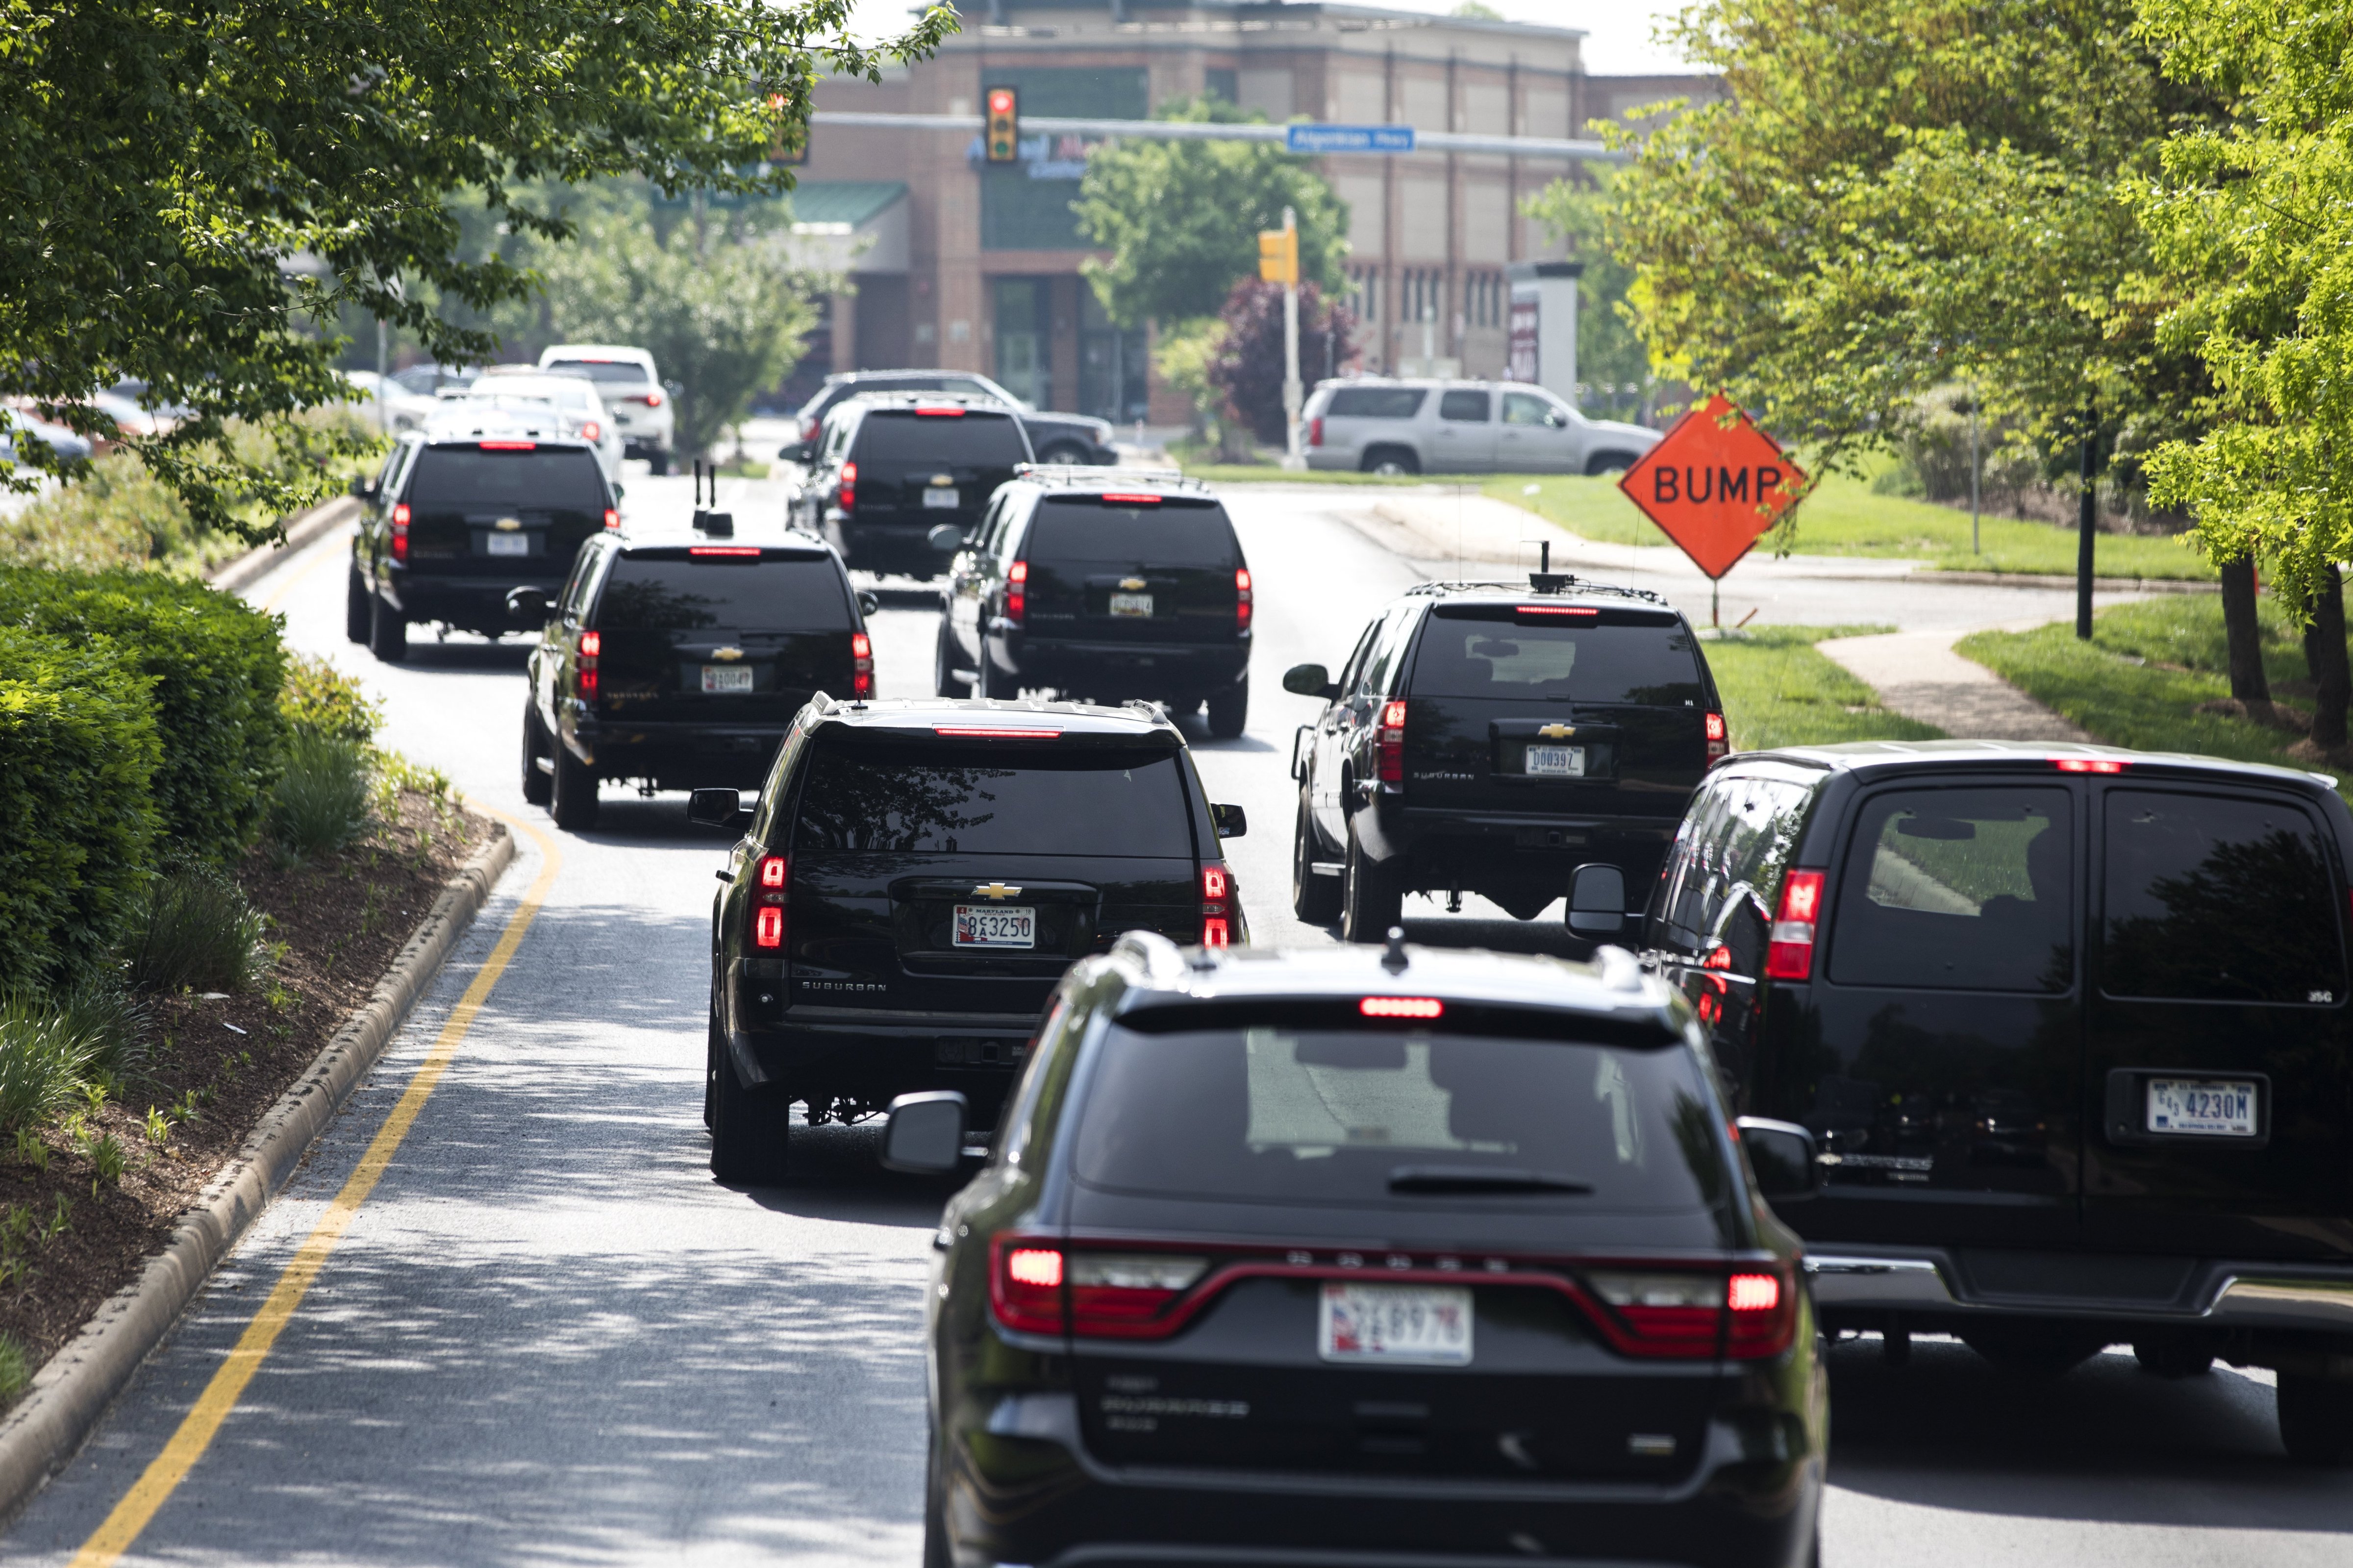 President Donald J. Trump's motorcade heads back to the White House from the Trump National Golf Club in Sterling, Virginia on April 30, 2017. (Jim Lo Scalzo—EPA/Getty Images)